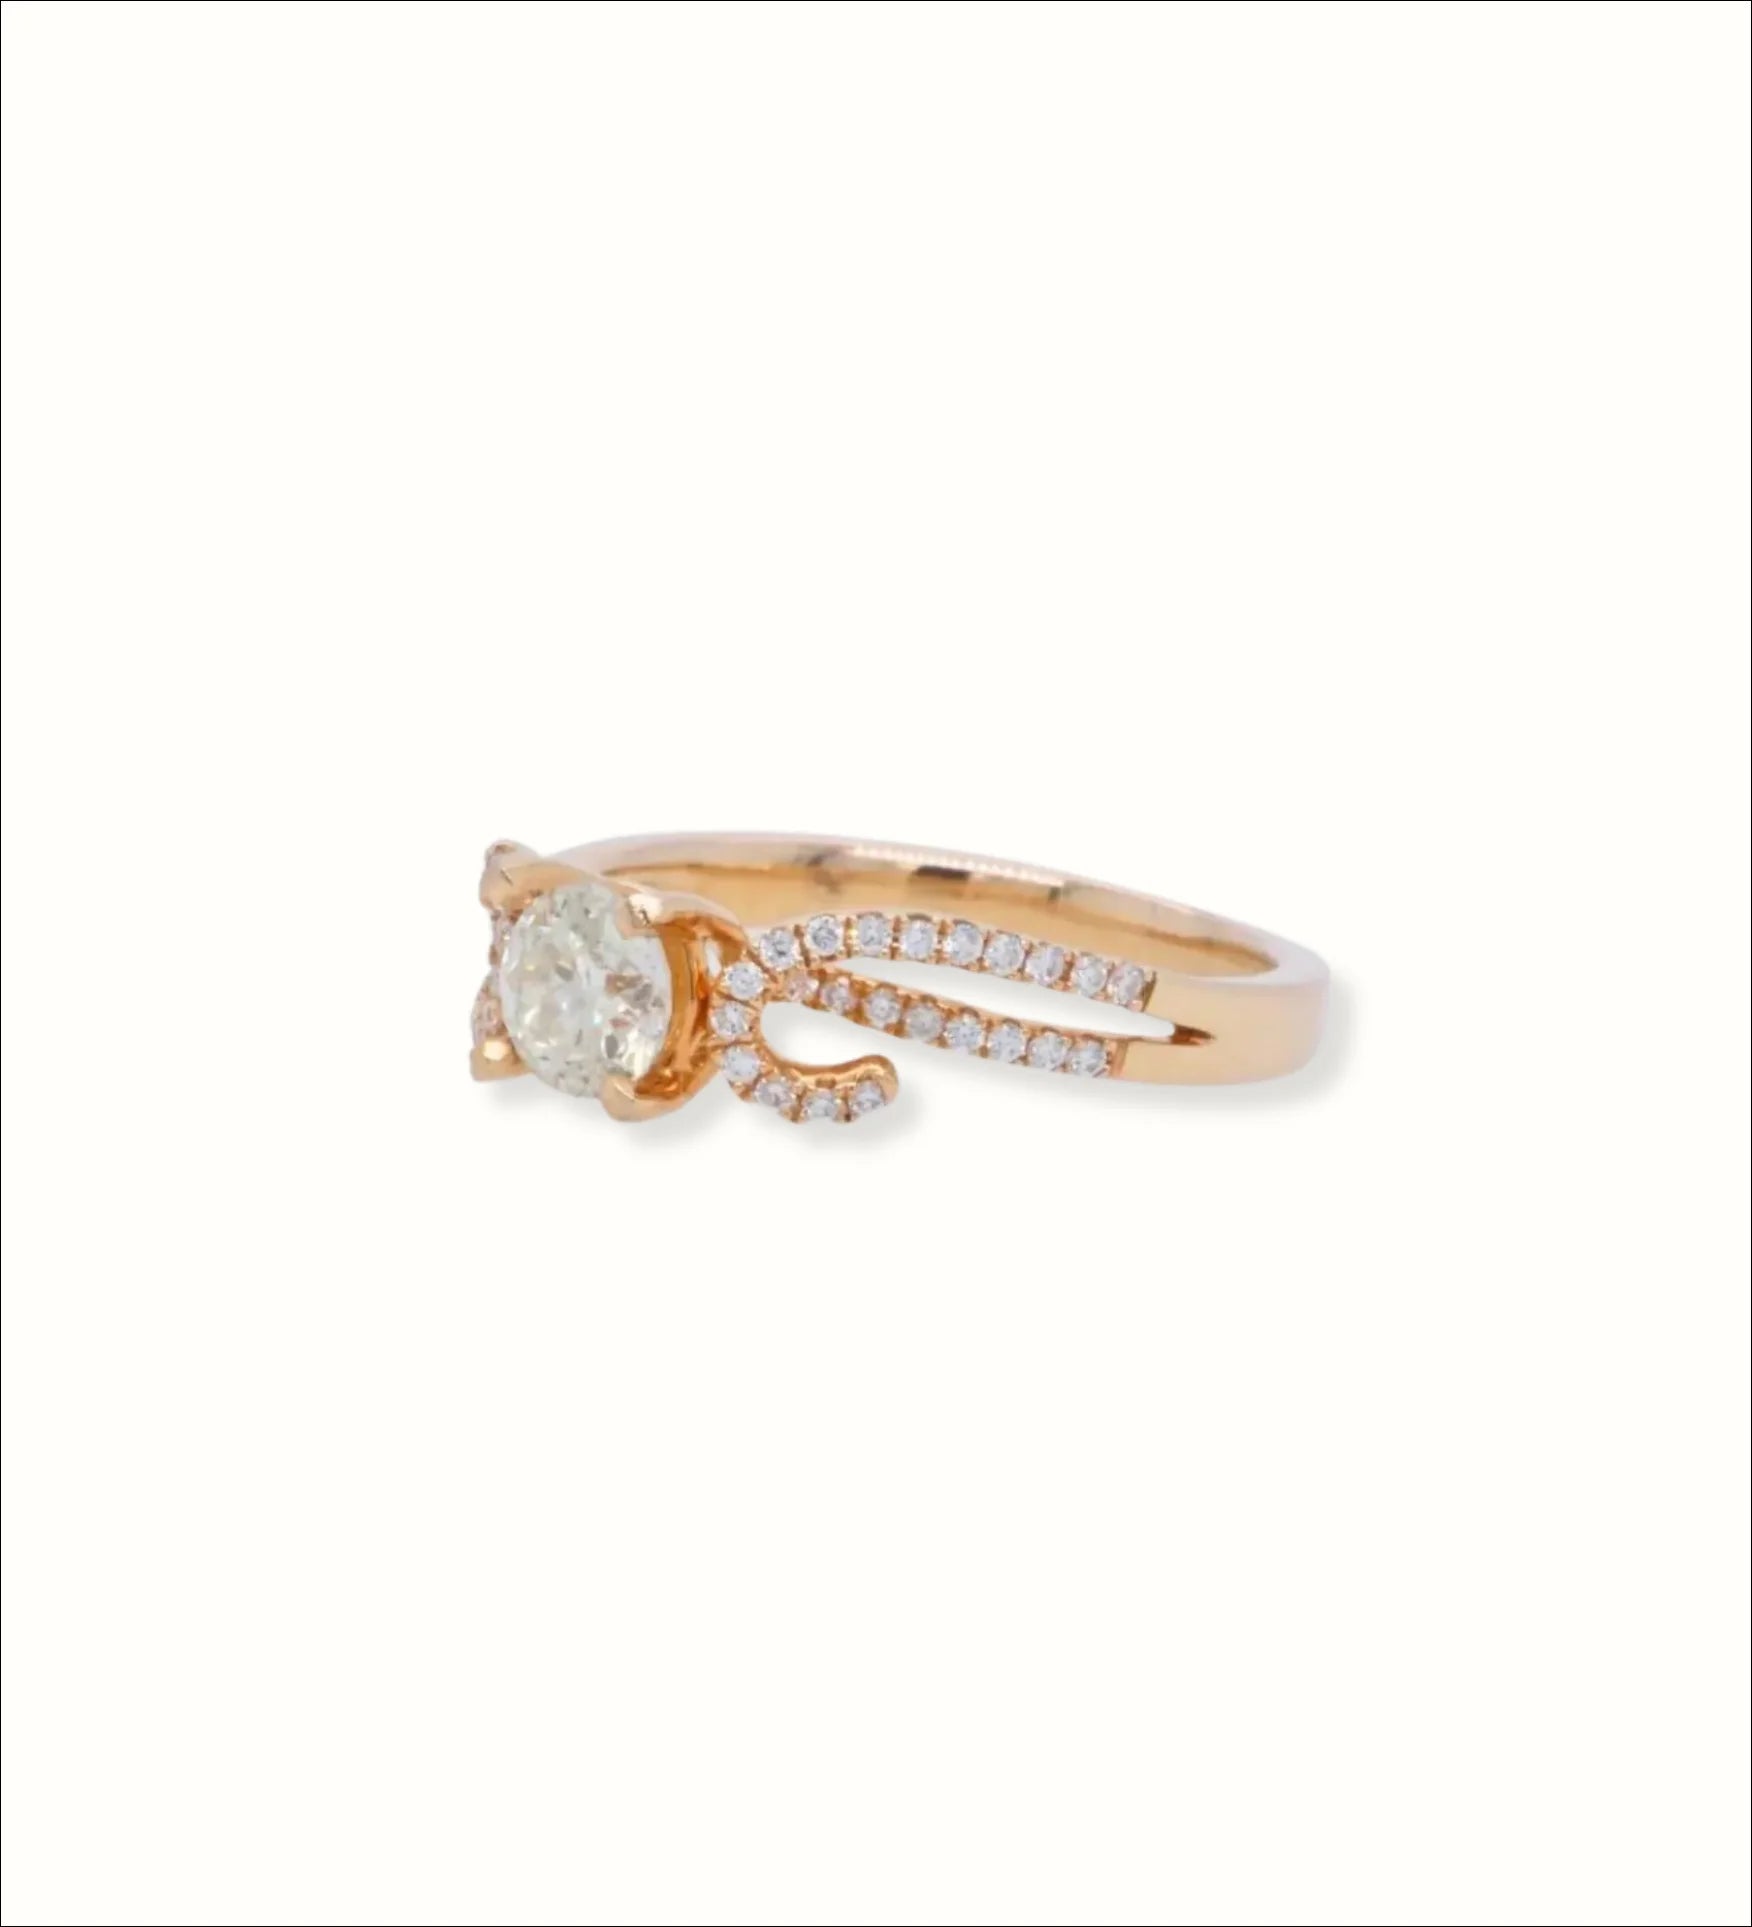 Romantic 18k Rose Gold Diamond Ring | Home page